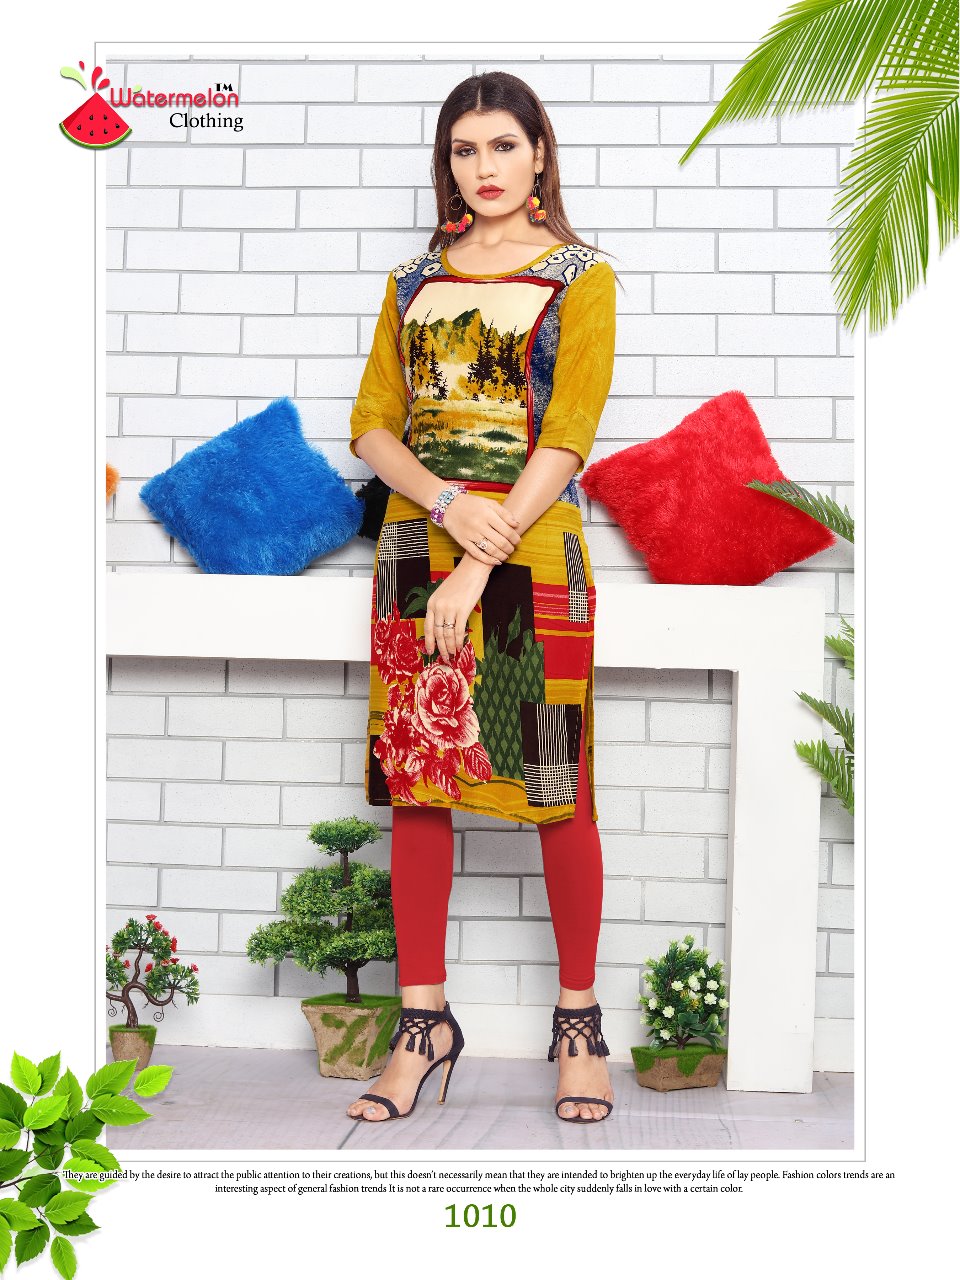 Kiss Miss Vol-4 By Watermelon 1001 To 1010 Series Stylish Colorful Fancy Beautiful Casual Wear & Ethnic Wear Heavy Rayon Printed Kurtis At Wholesale Price